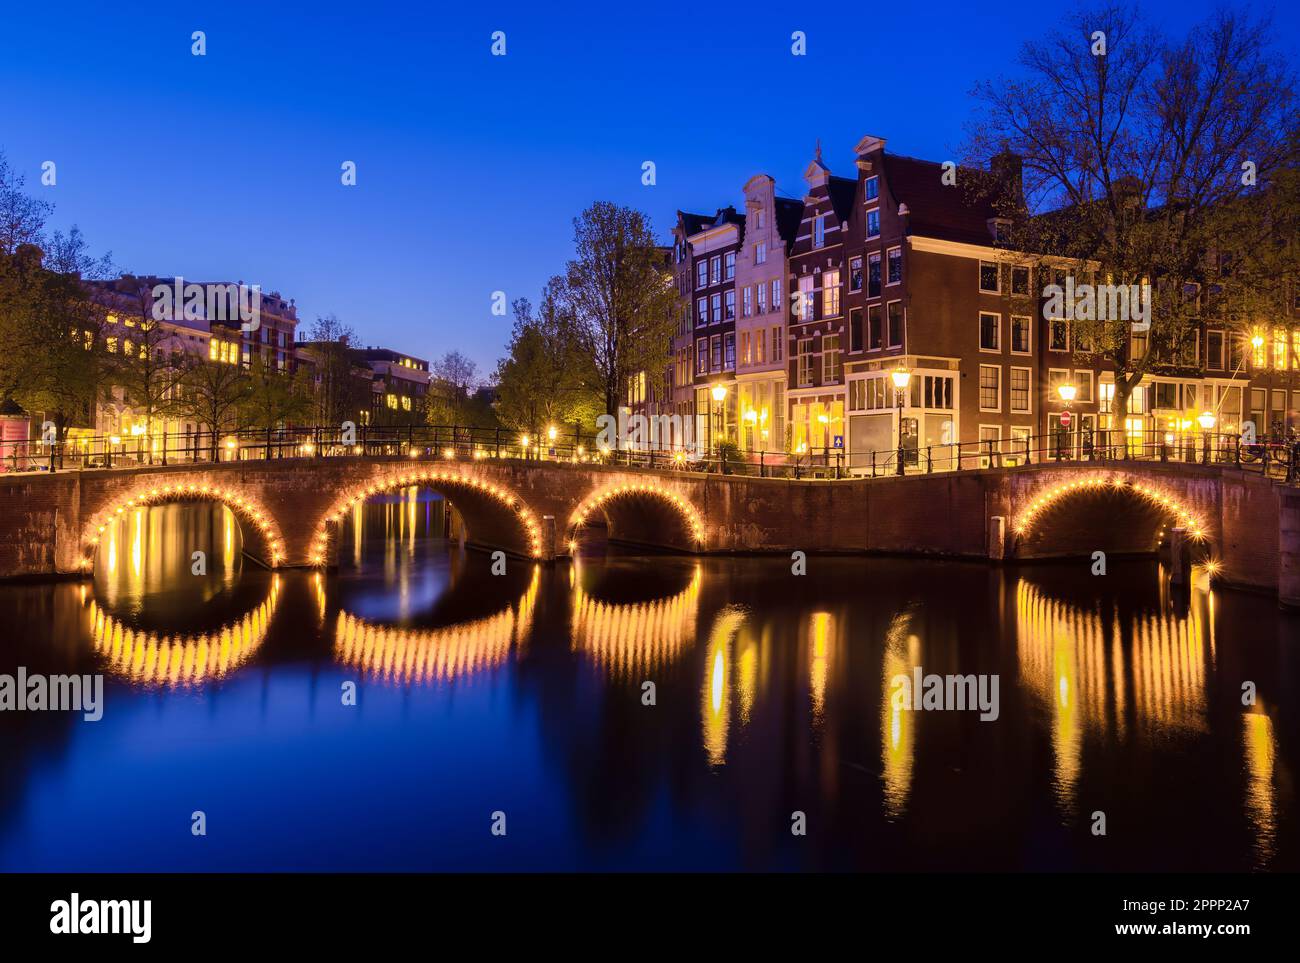 A tranquil evening in Amsterdam, illuminated by the soft glow of dusk. A beautiful arch bridge reflects on a canal amidst stunning architecture and ri Stock Photo